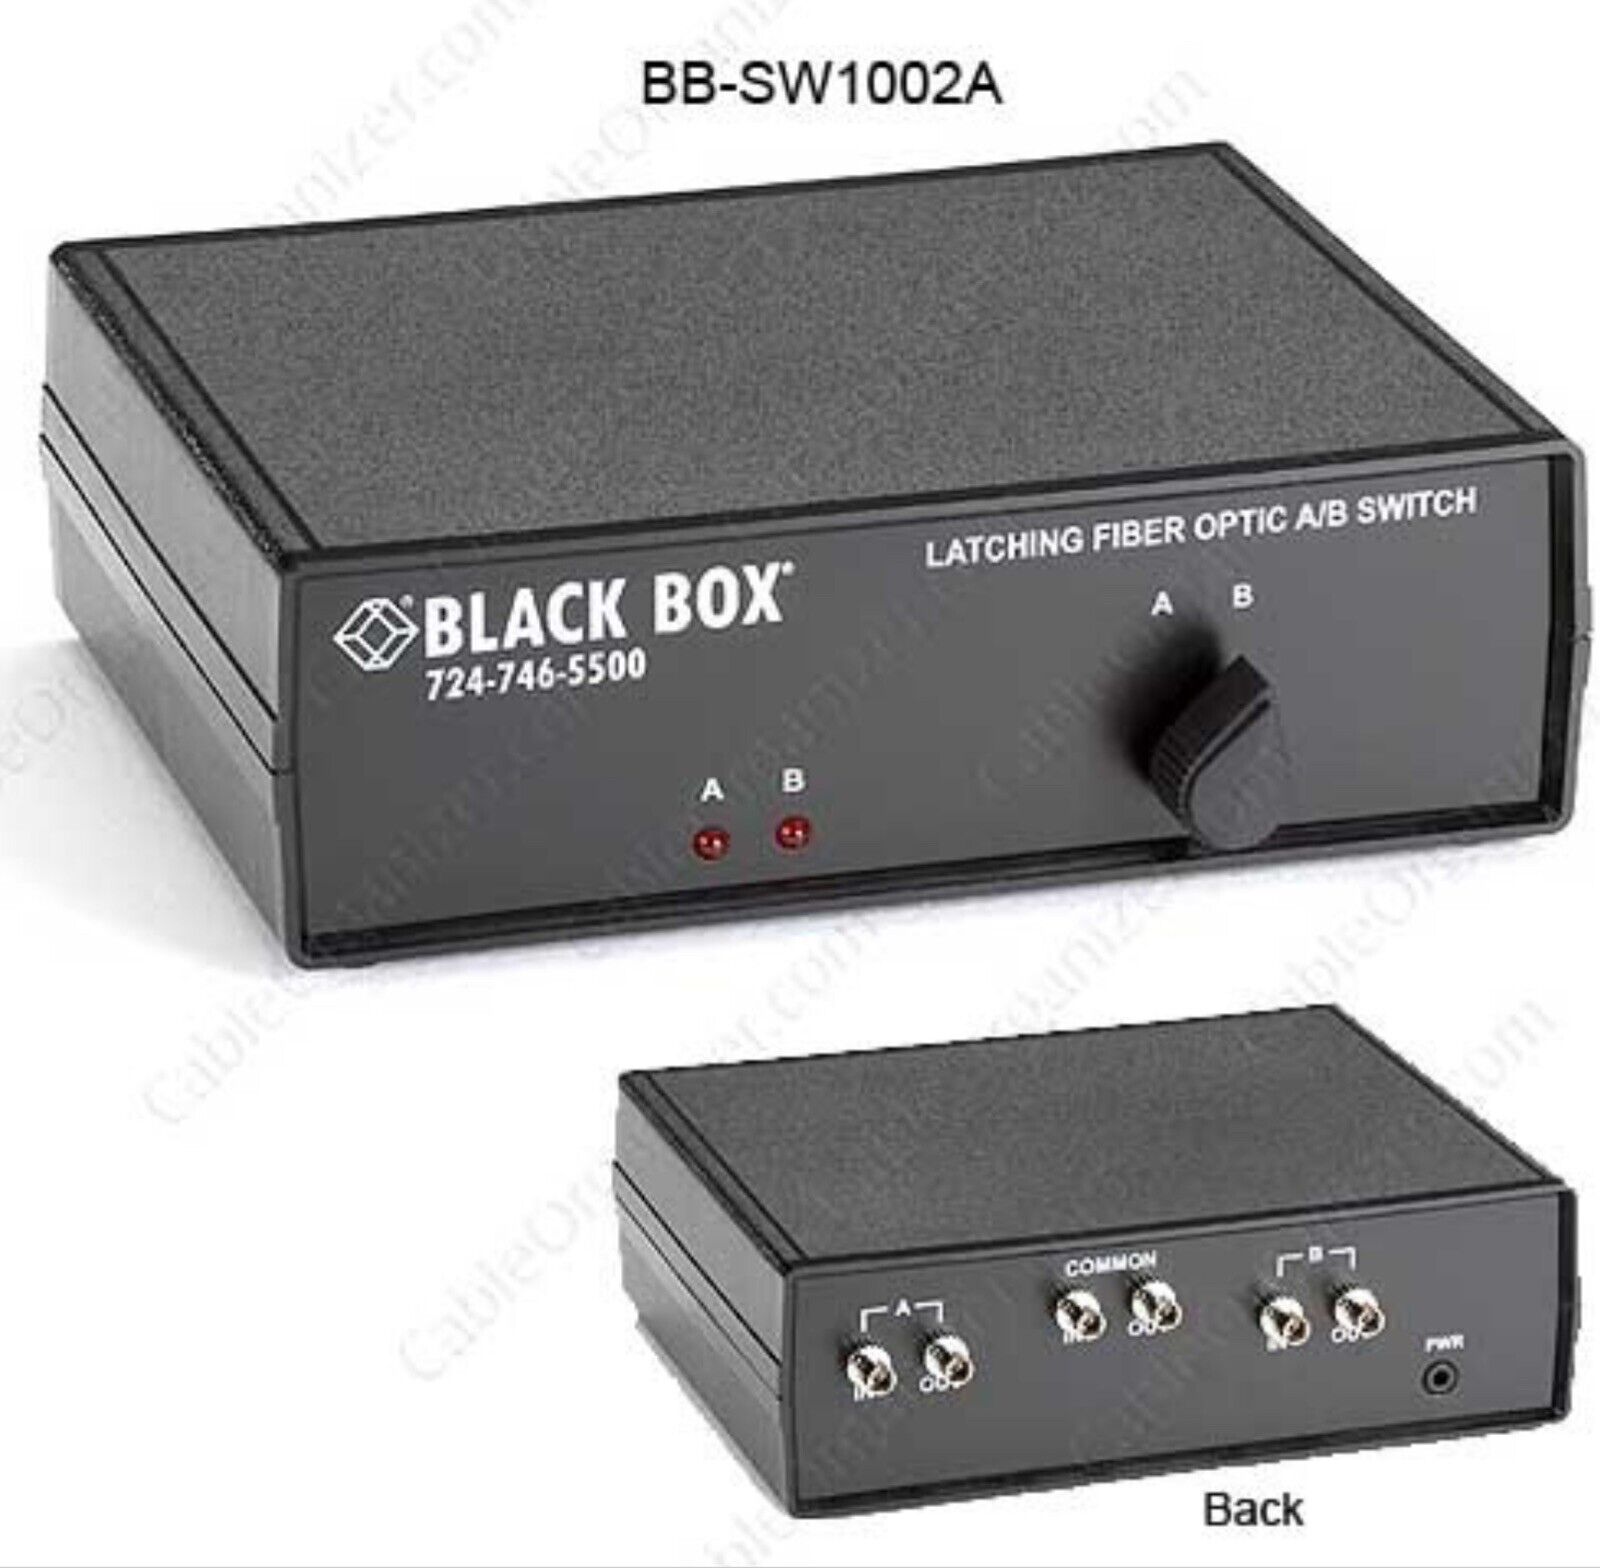 Black Box Fiber Optic A/B Switches and A/B Switches with Loopback